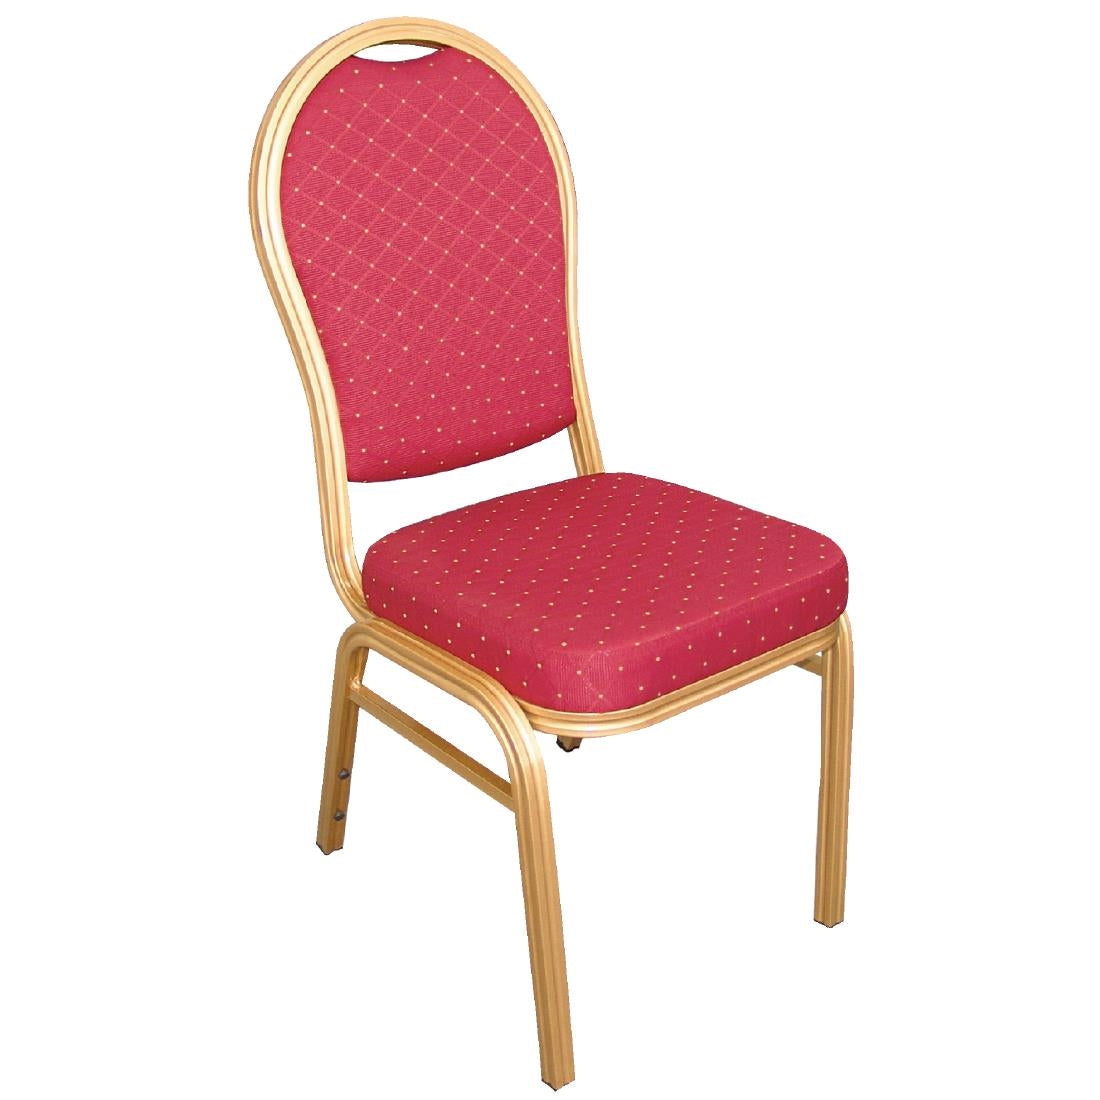 U525 Bolero Arched Back Banquet Chairs Red & Gold (Pack of 4)